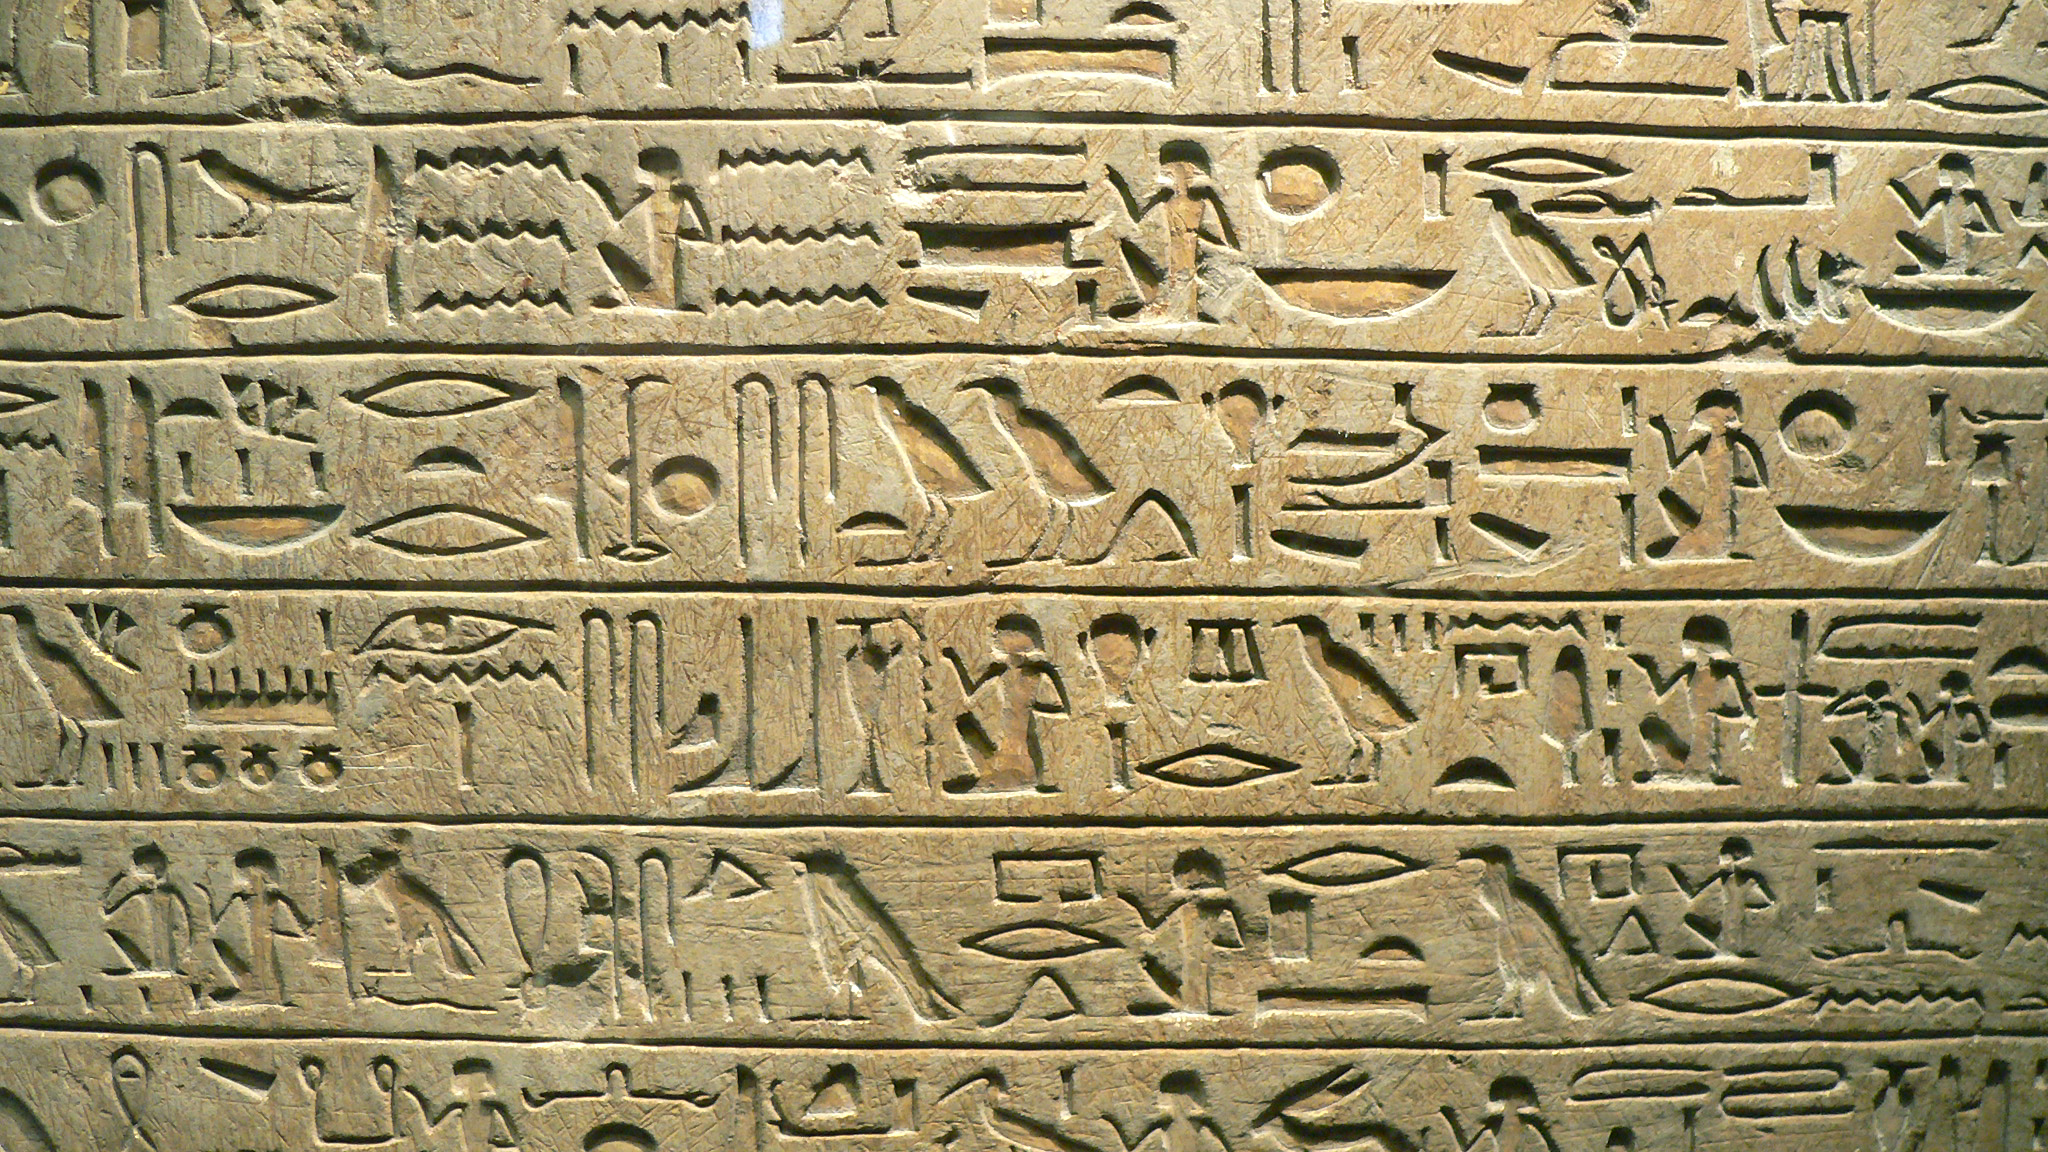 For the First Time, You'll Be Able to Read Ancient Egyptian ...